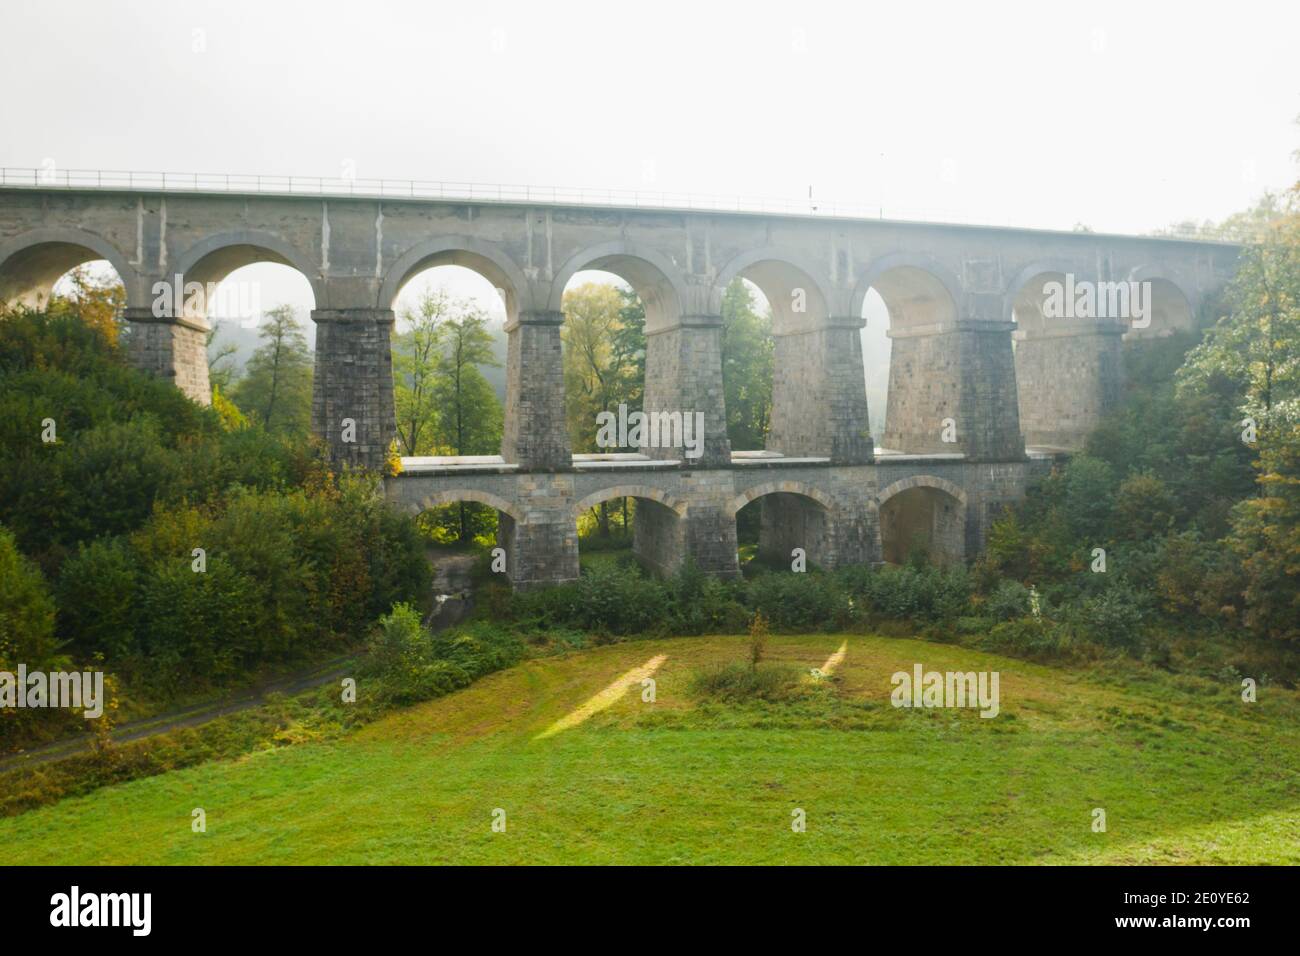 An two-tiered aqueduct or arched bridge in the terrain with high trees and beautiful landscape at sunlight. Stock Photo